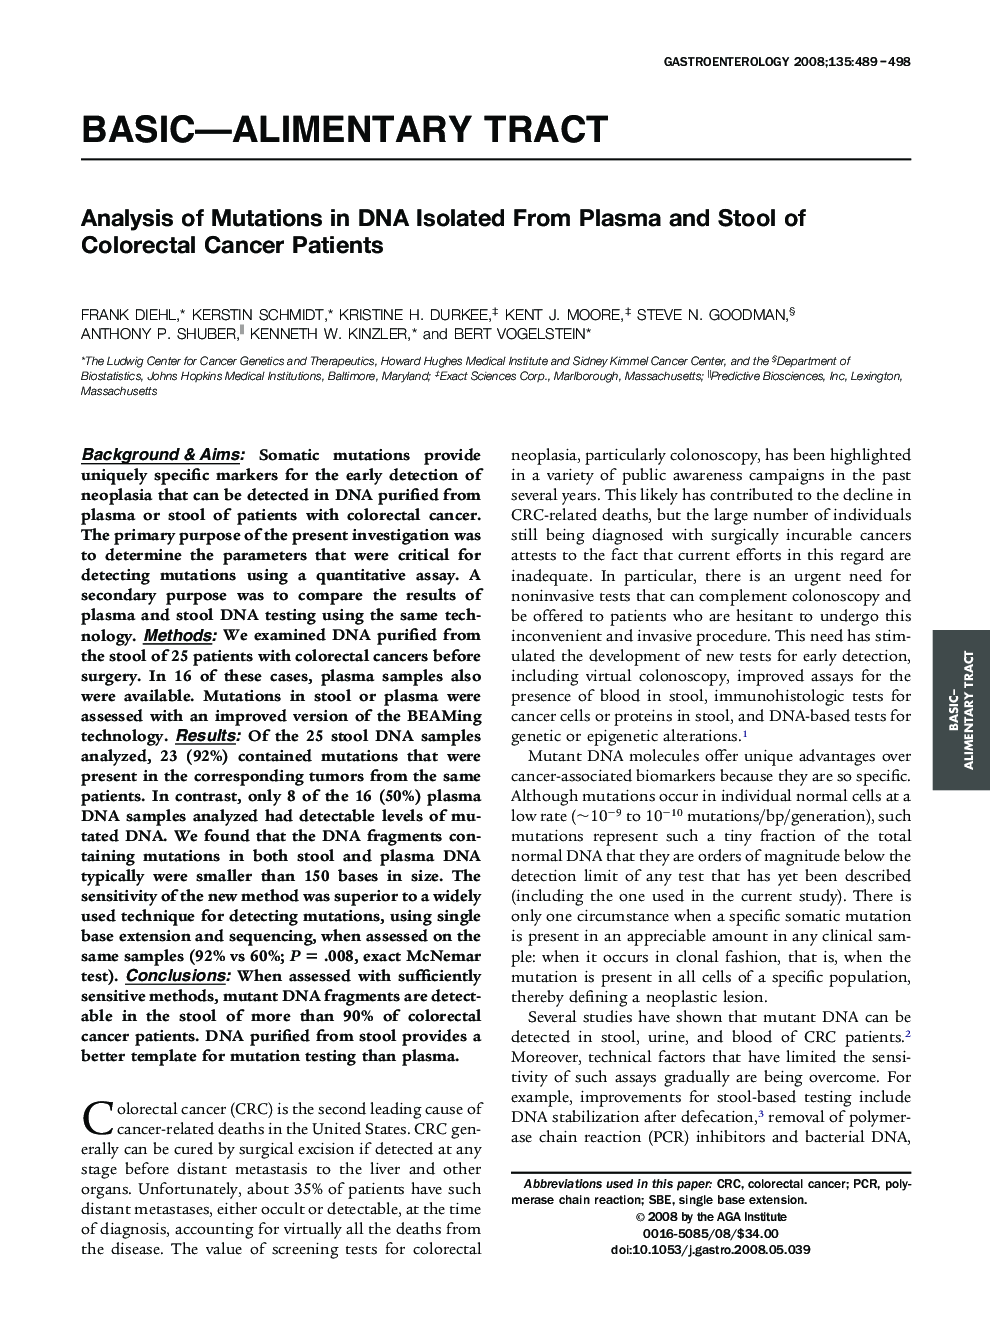 Analysis of Mutations in DNA Isolated From Plasma and Stool of Colorectal Cancer Patients